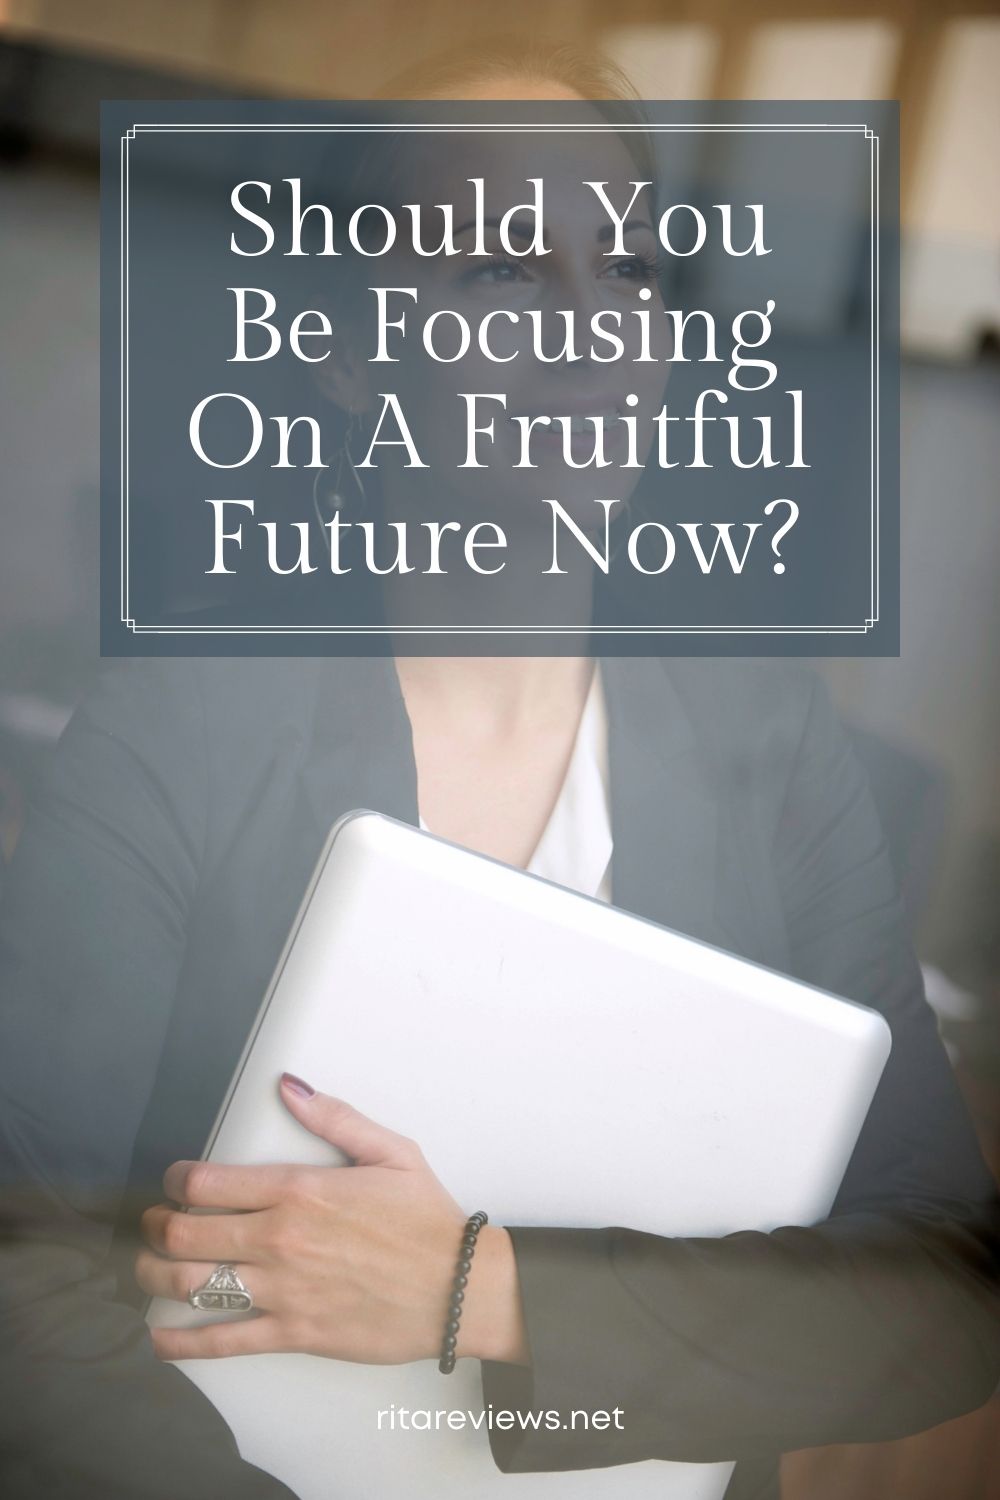 Should You Be Focusing On A Fruitful Future Now